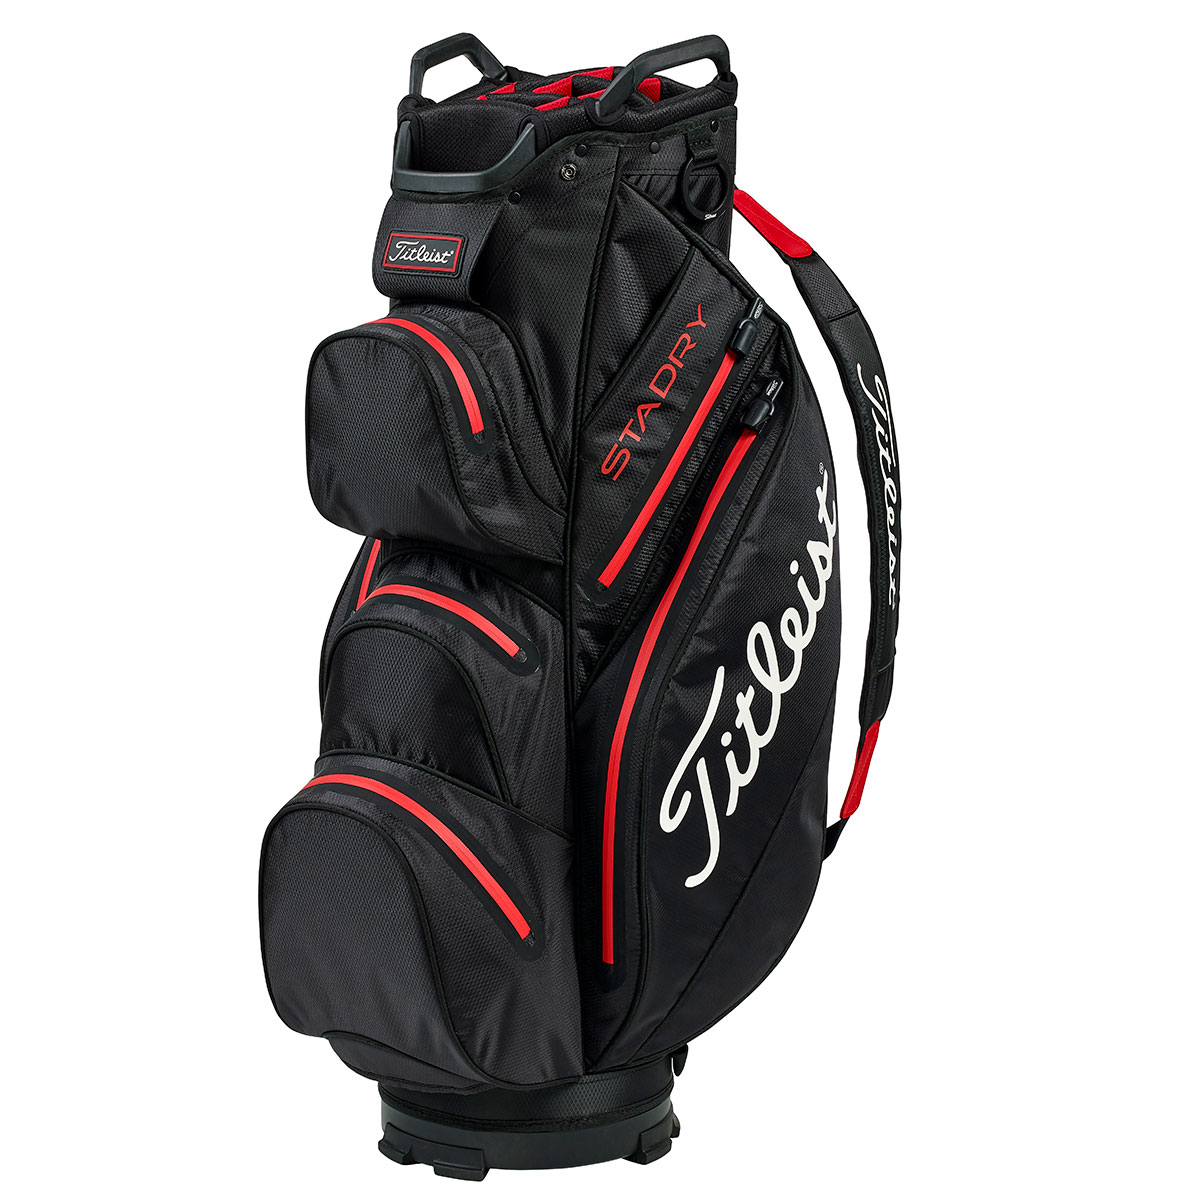 Titleist Golf Bag With Stand